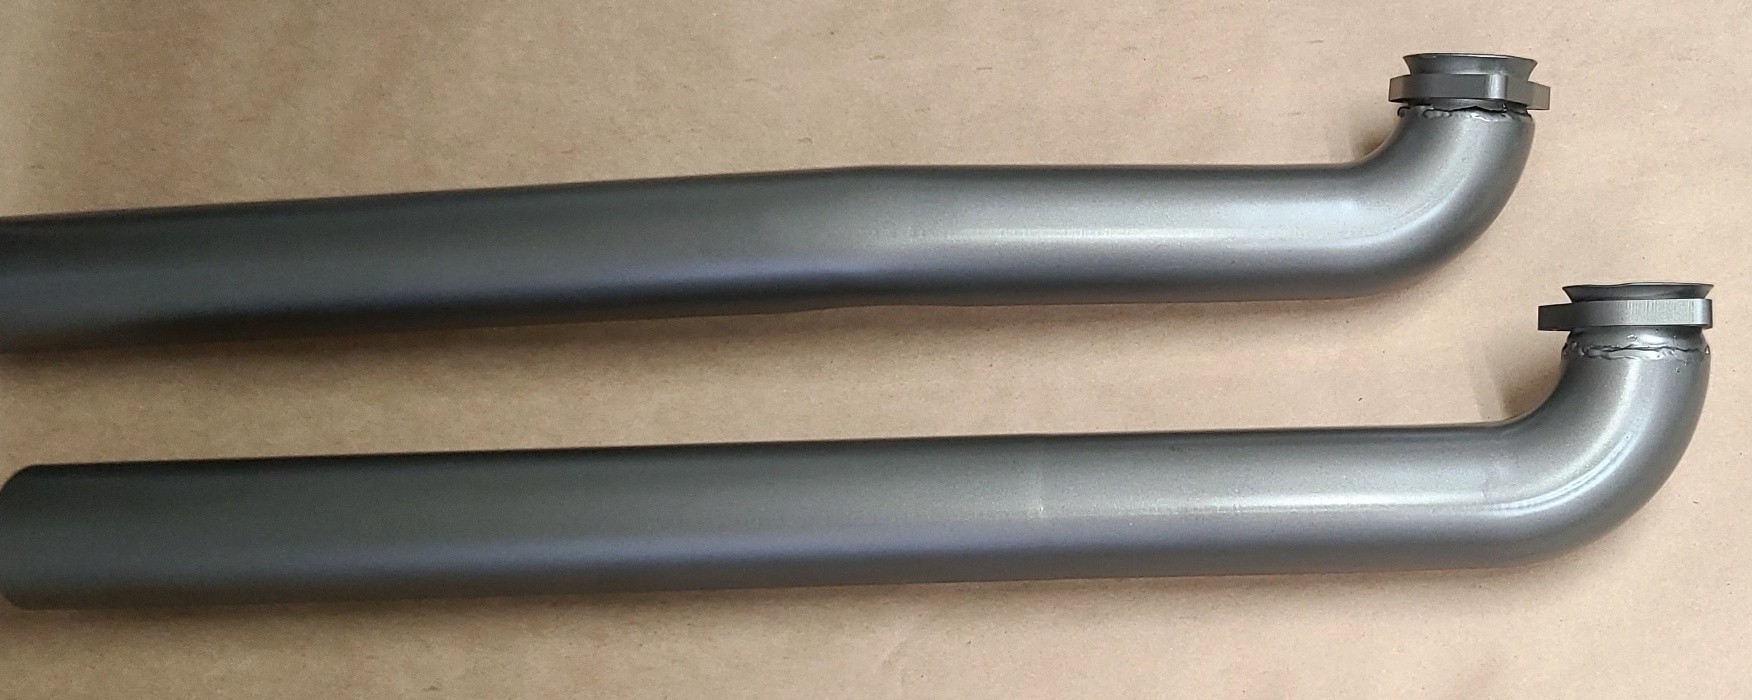 <B> SSP-30A 3" DOWNPIPES FOR RAM AIR FACTORY HEADERS--Three bolt flange on ea side